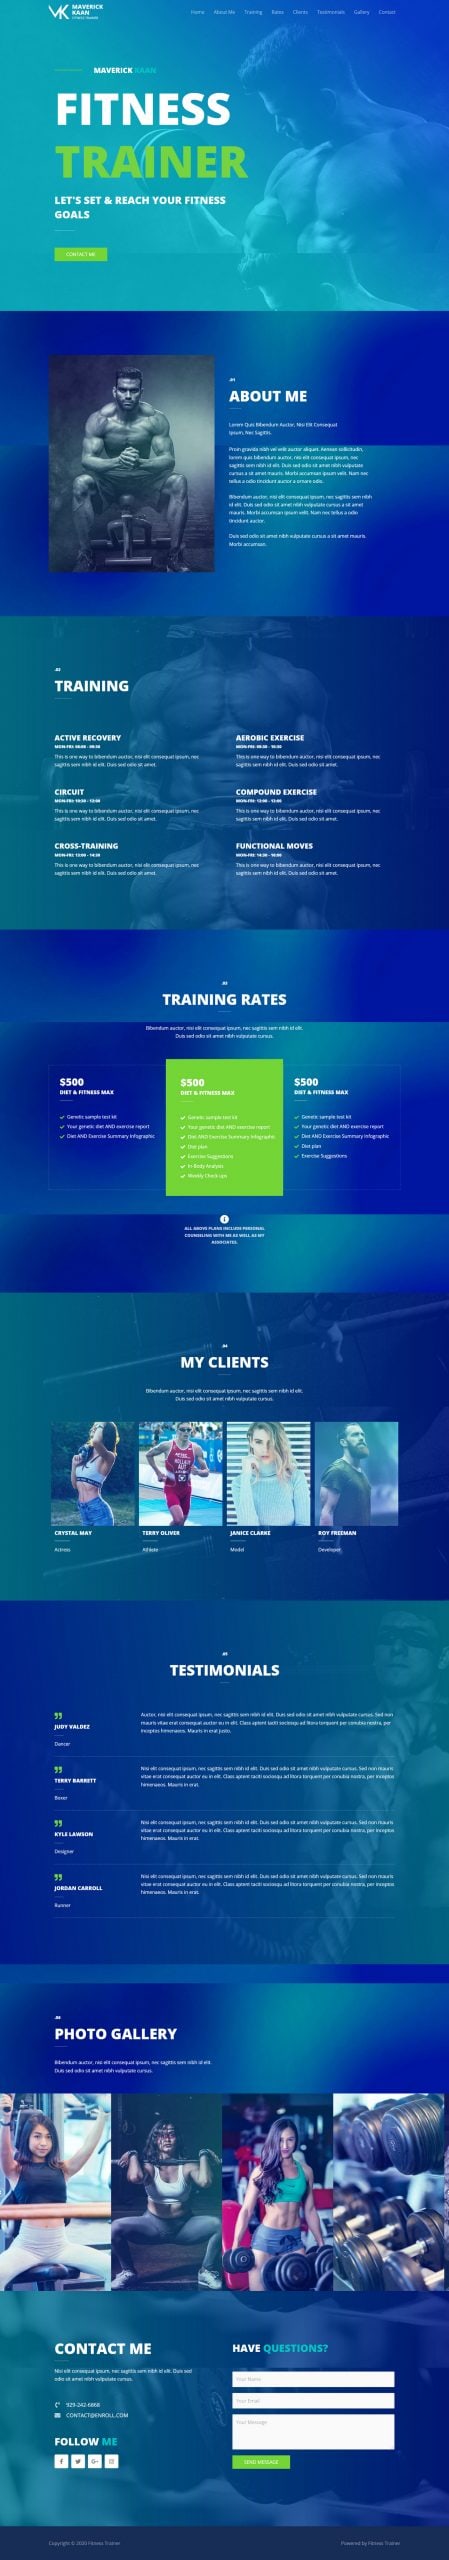 Fagowi.com Website Design Templates For Fitness Trainer Male - Home Page Image